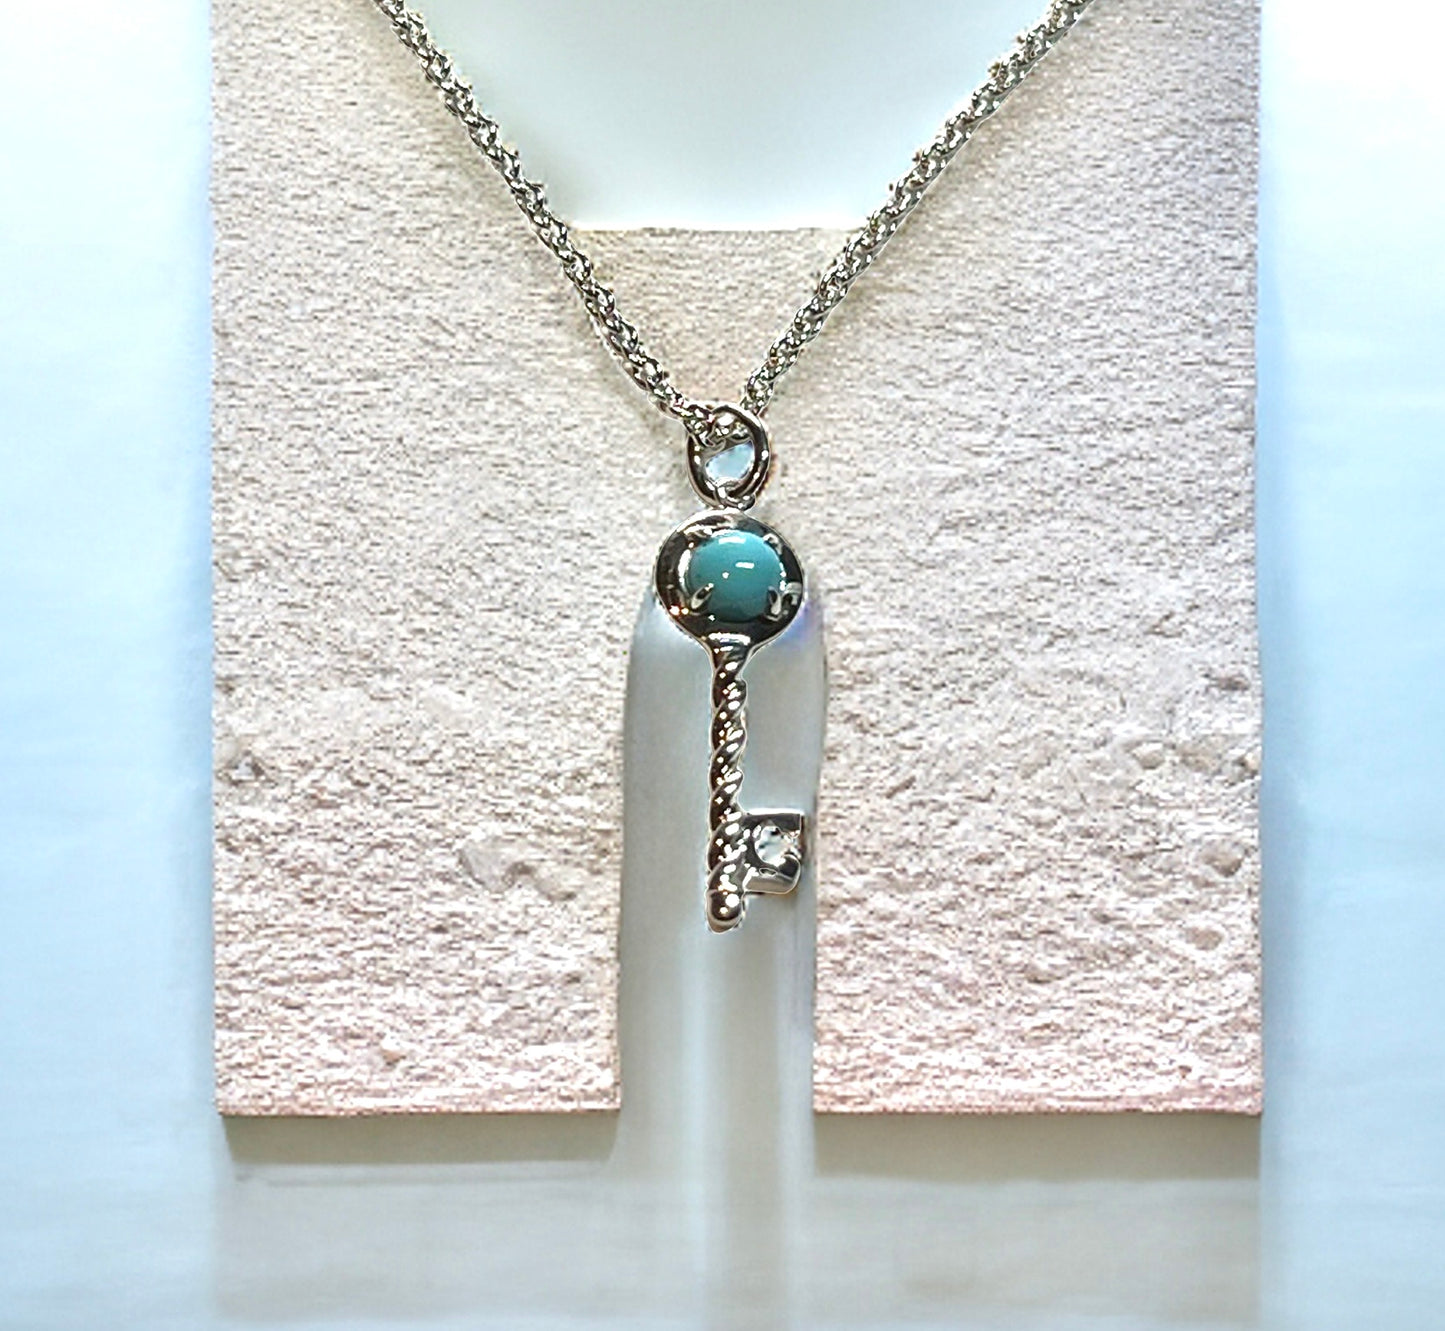 Tiffany & Co Estate Turquoise Key Necklace With Chain 20" Silver By Paloma Picasso TIF463 - Certified Fine Jewelry